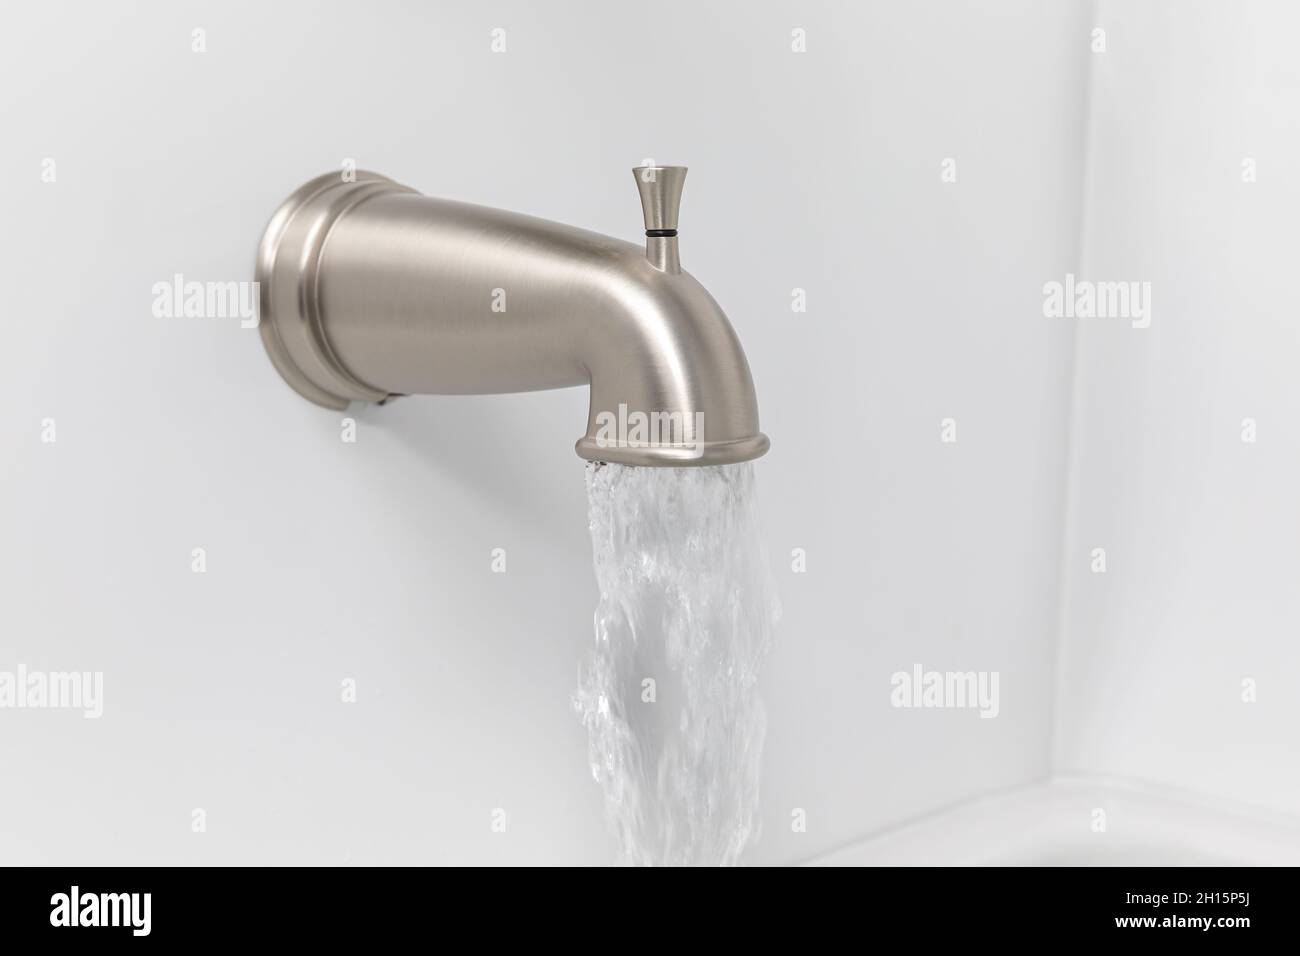 Bathtub spout flowing water. Plumbing repair, bathroom remodel and renovation concept Stock Photo